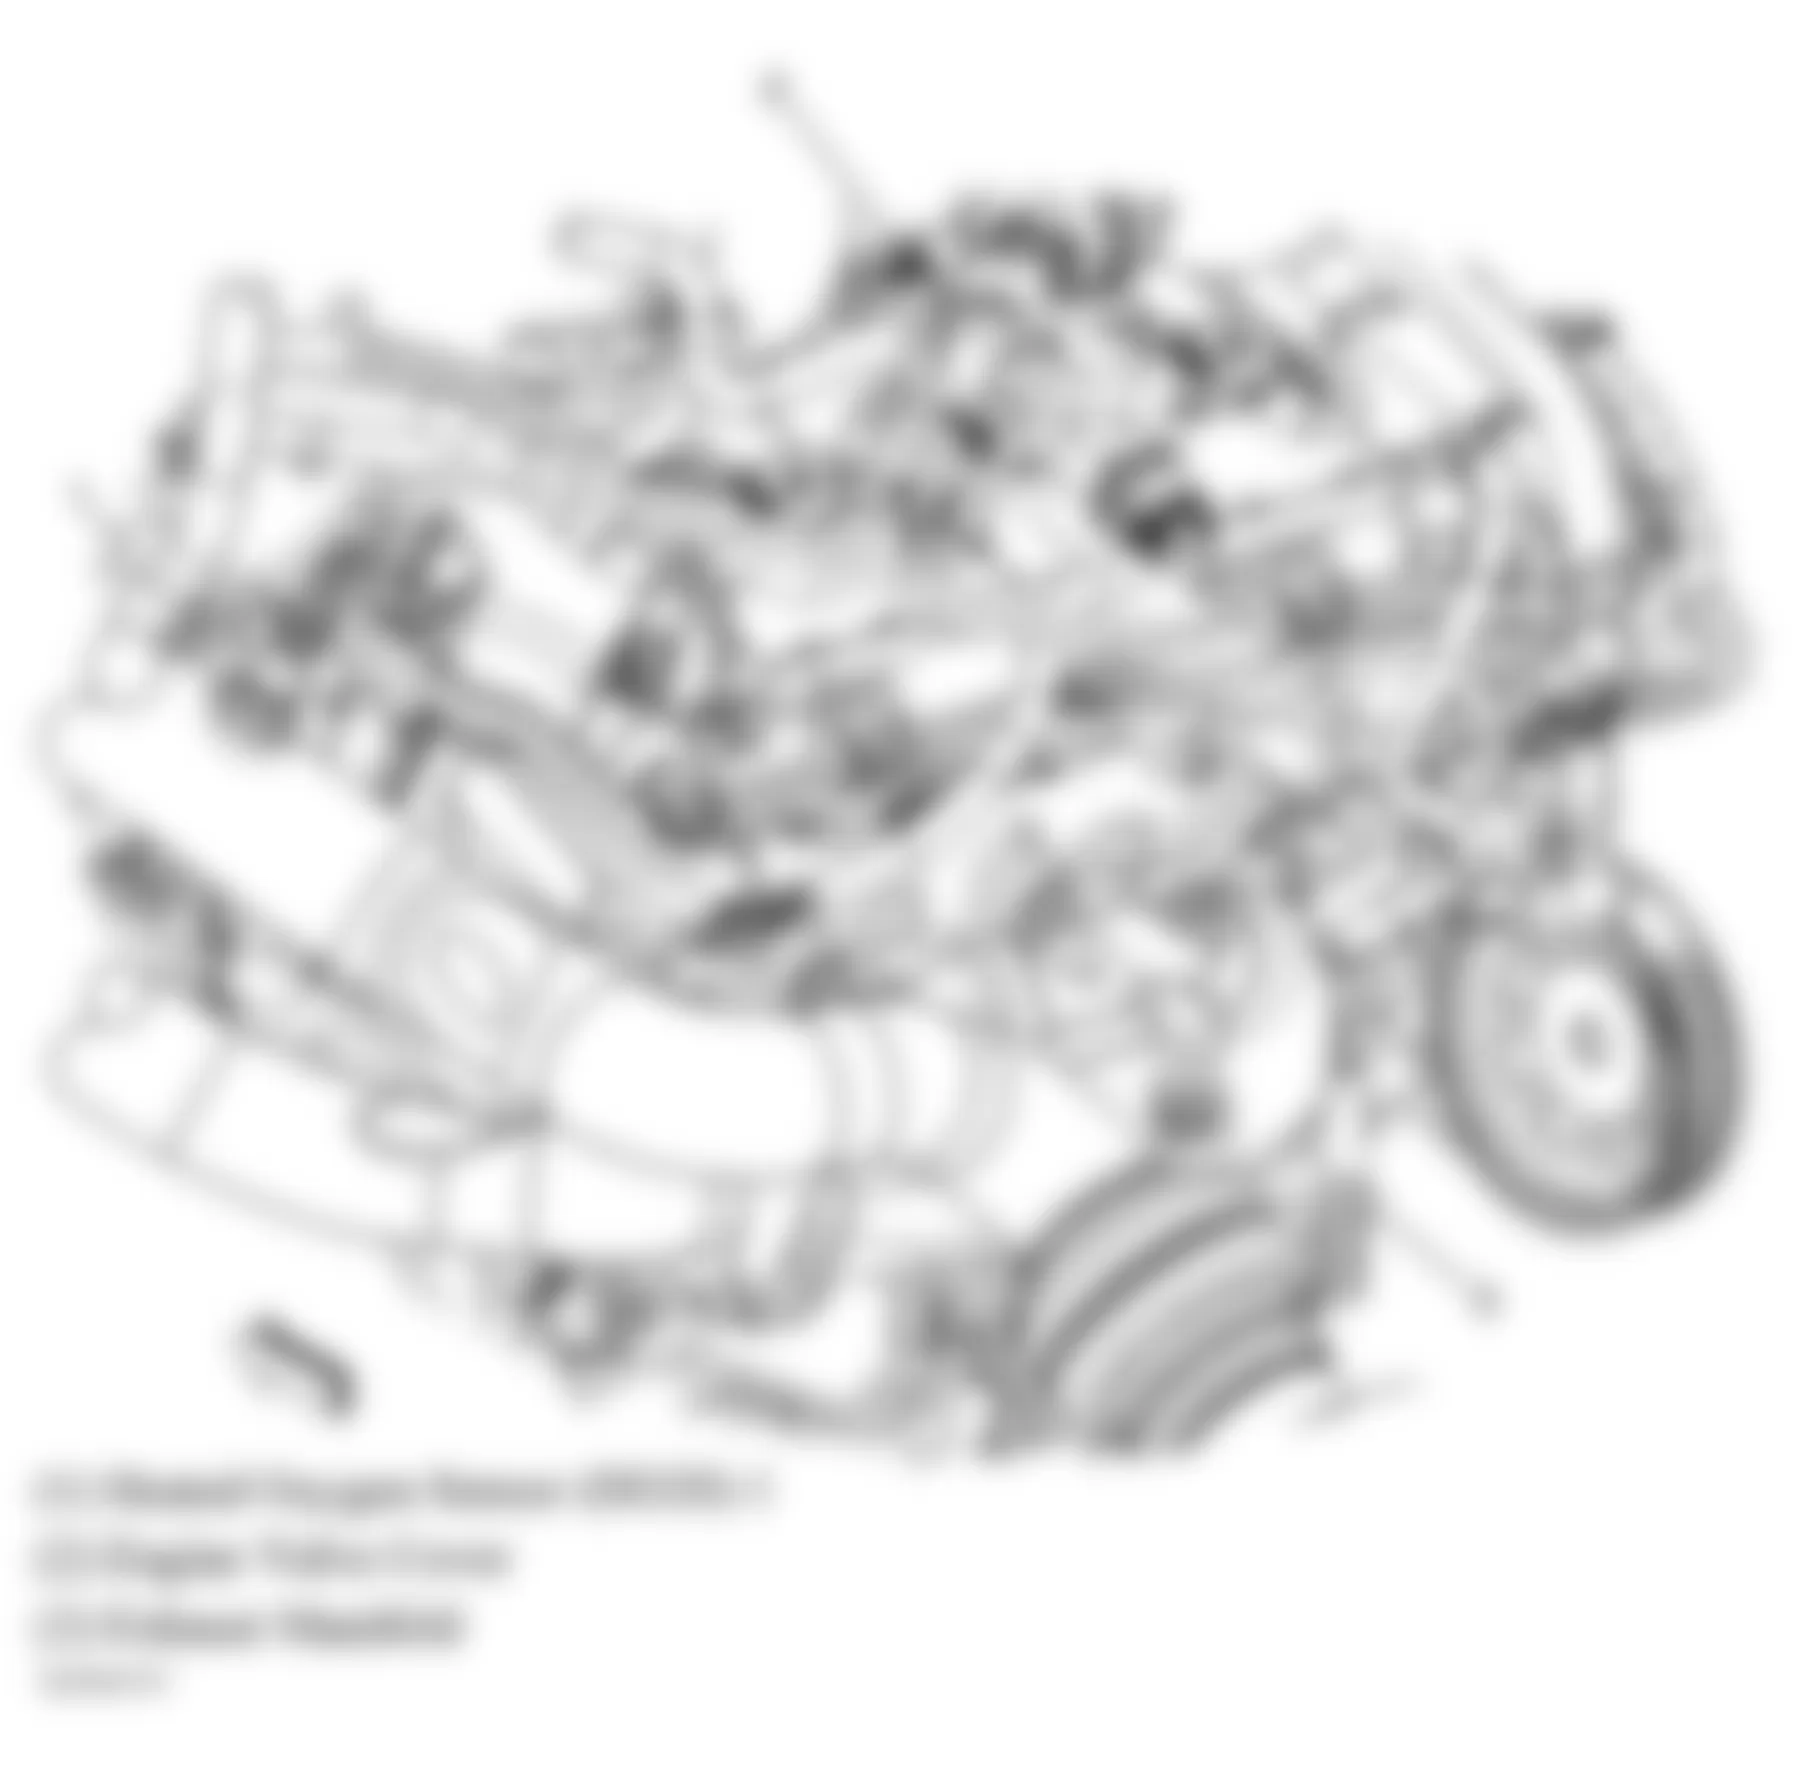 Buick LaCrosse CXL 2008 - Component Locations -  Right Rear Of Engine (3.6L)